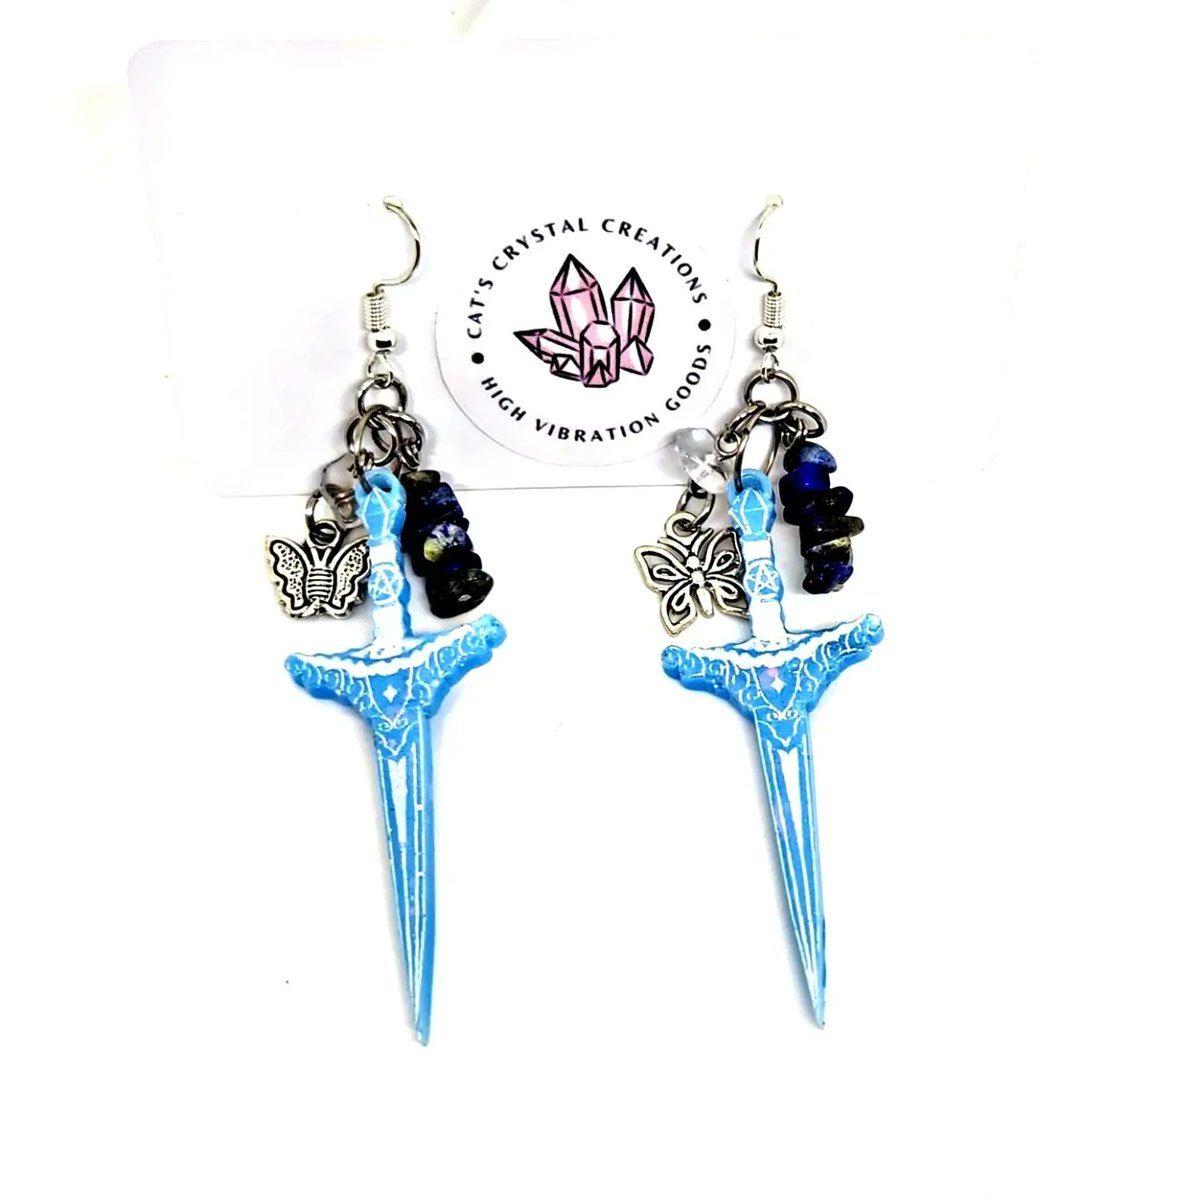 Lapis Lazuli Dagger Dangle Earrings 🗡 Will be available once my Etsy opens - COMING SOON!

#catscrystalcreations #crystal #crystals #jewelry #earrings #crystaljewelry #crystalearrings #LapisLazuli #clearquartz #witch #witchy #witchyvibes #fae #faecore #faerie #fairy #fairycore